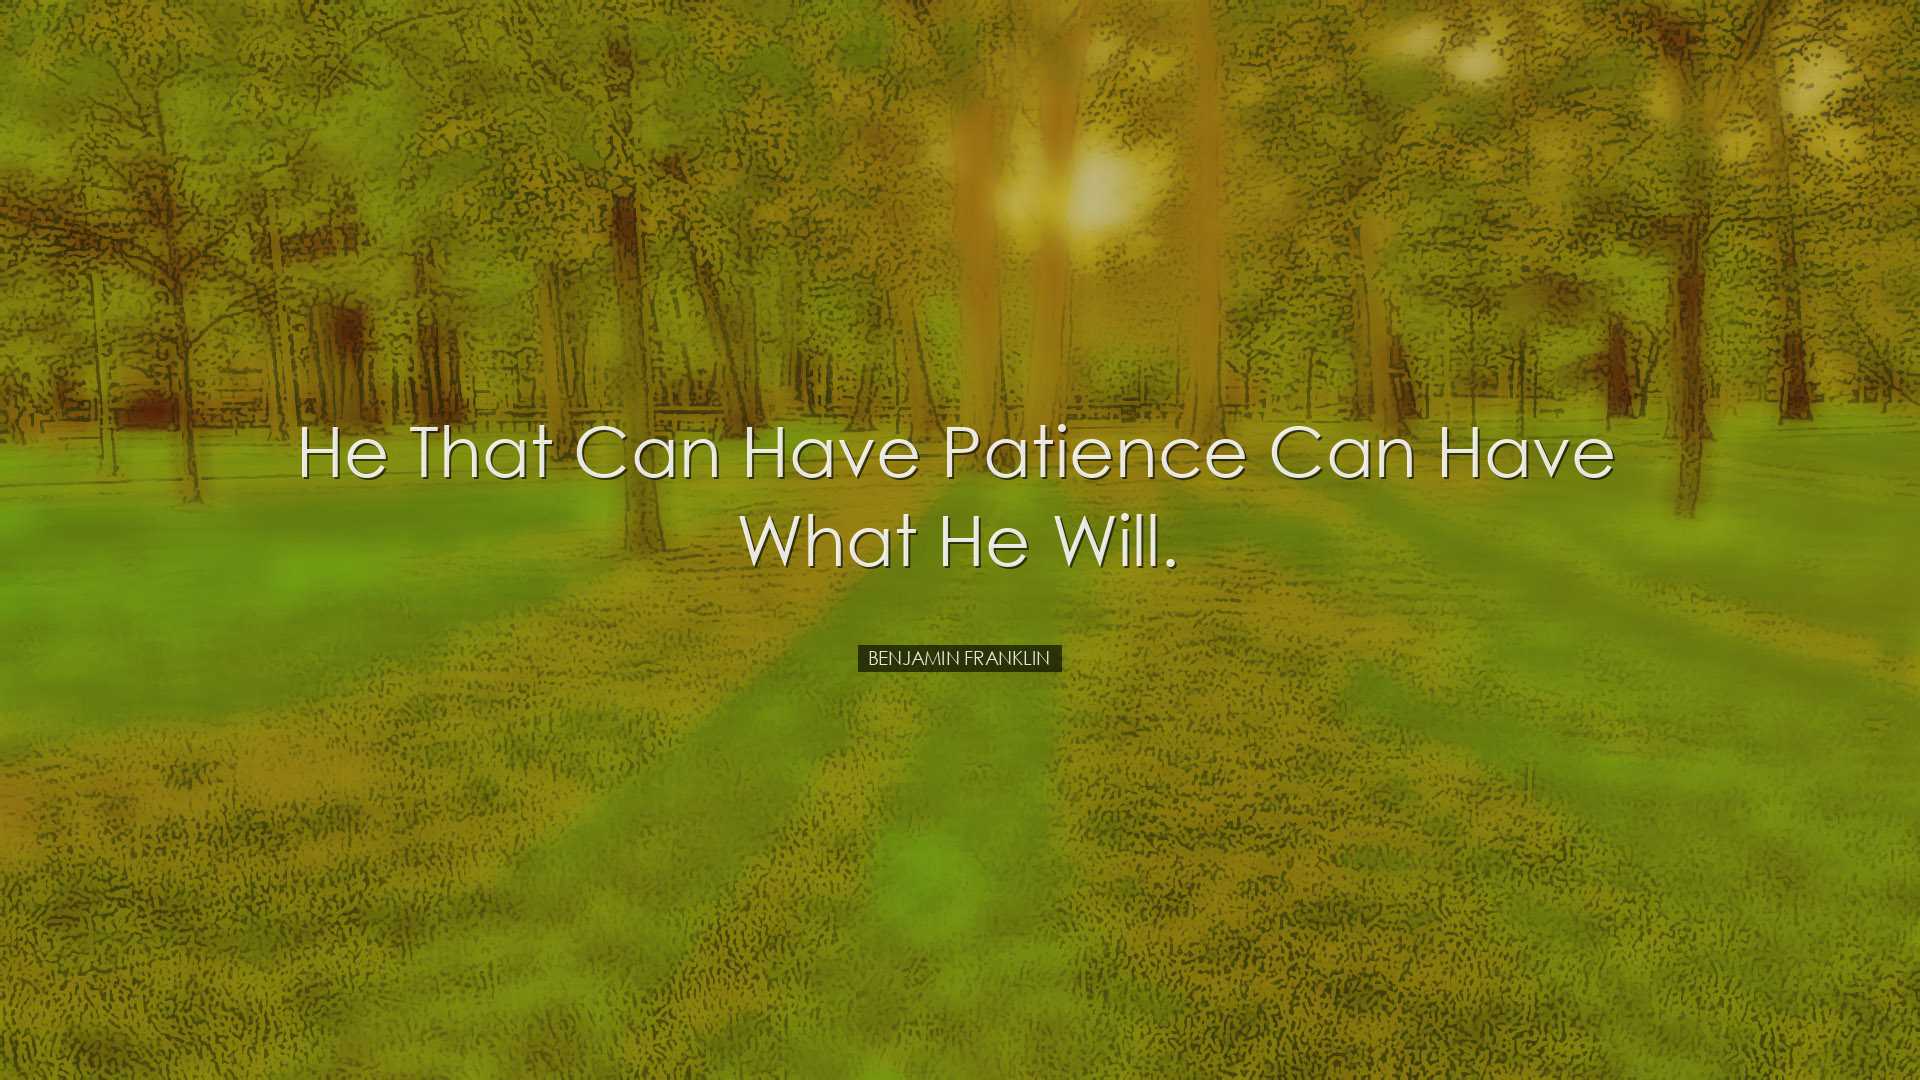 He that can have patience can have what he will. - Benjamin Frankl